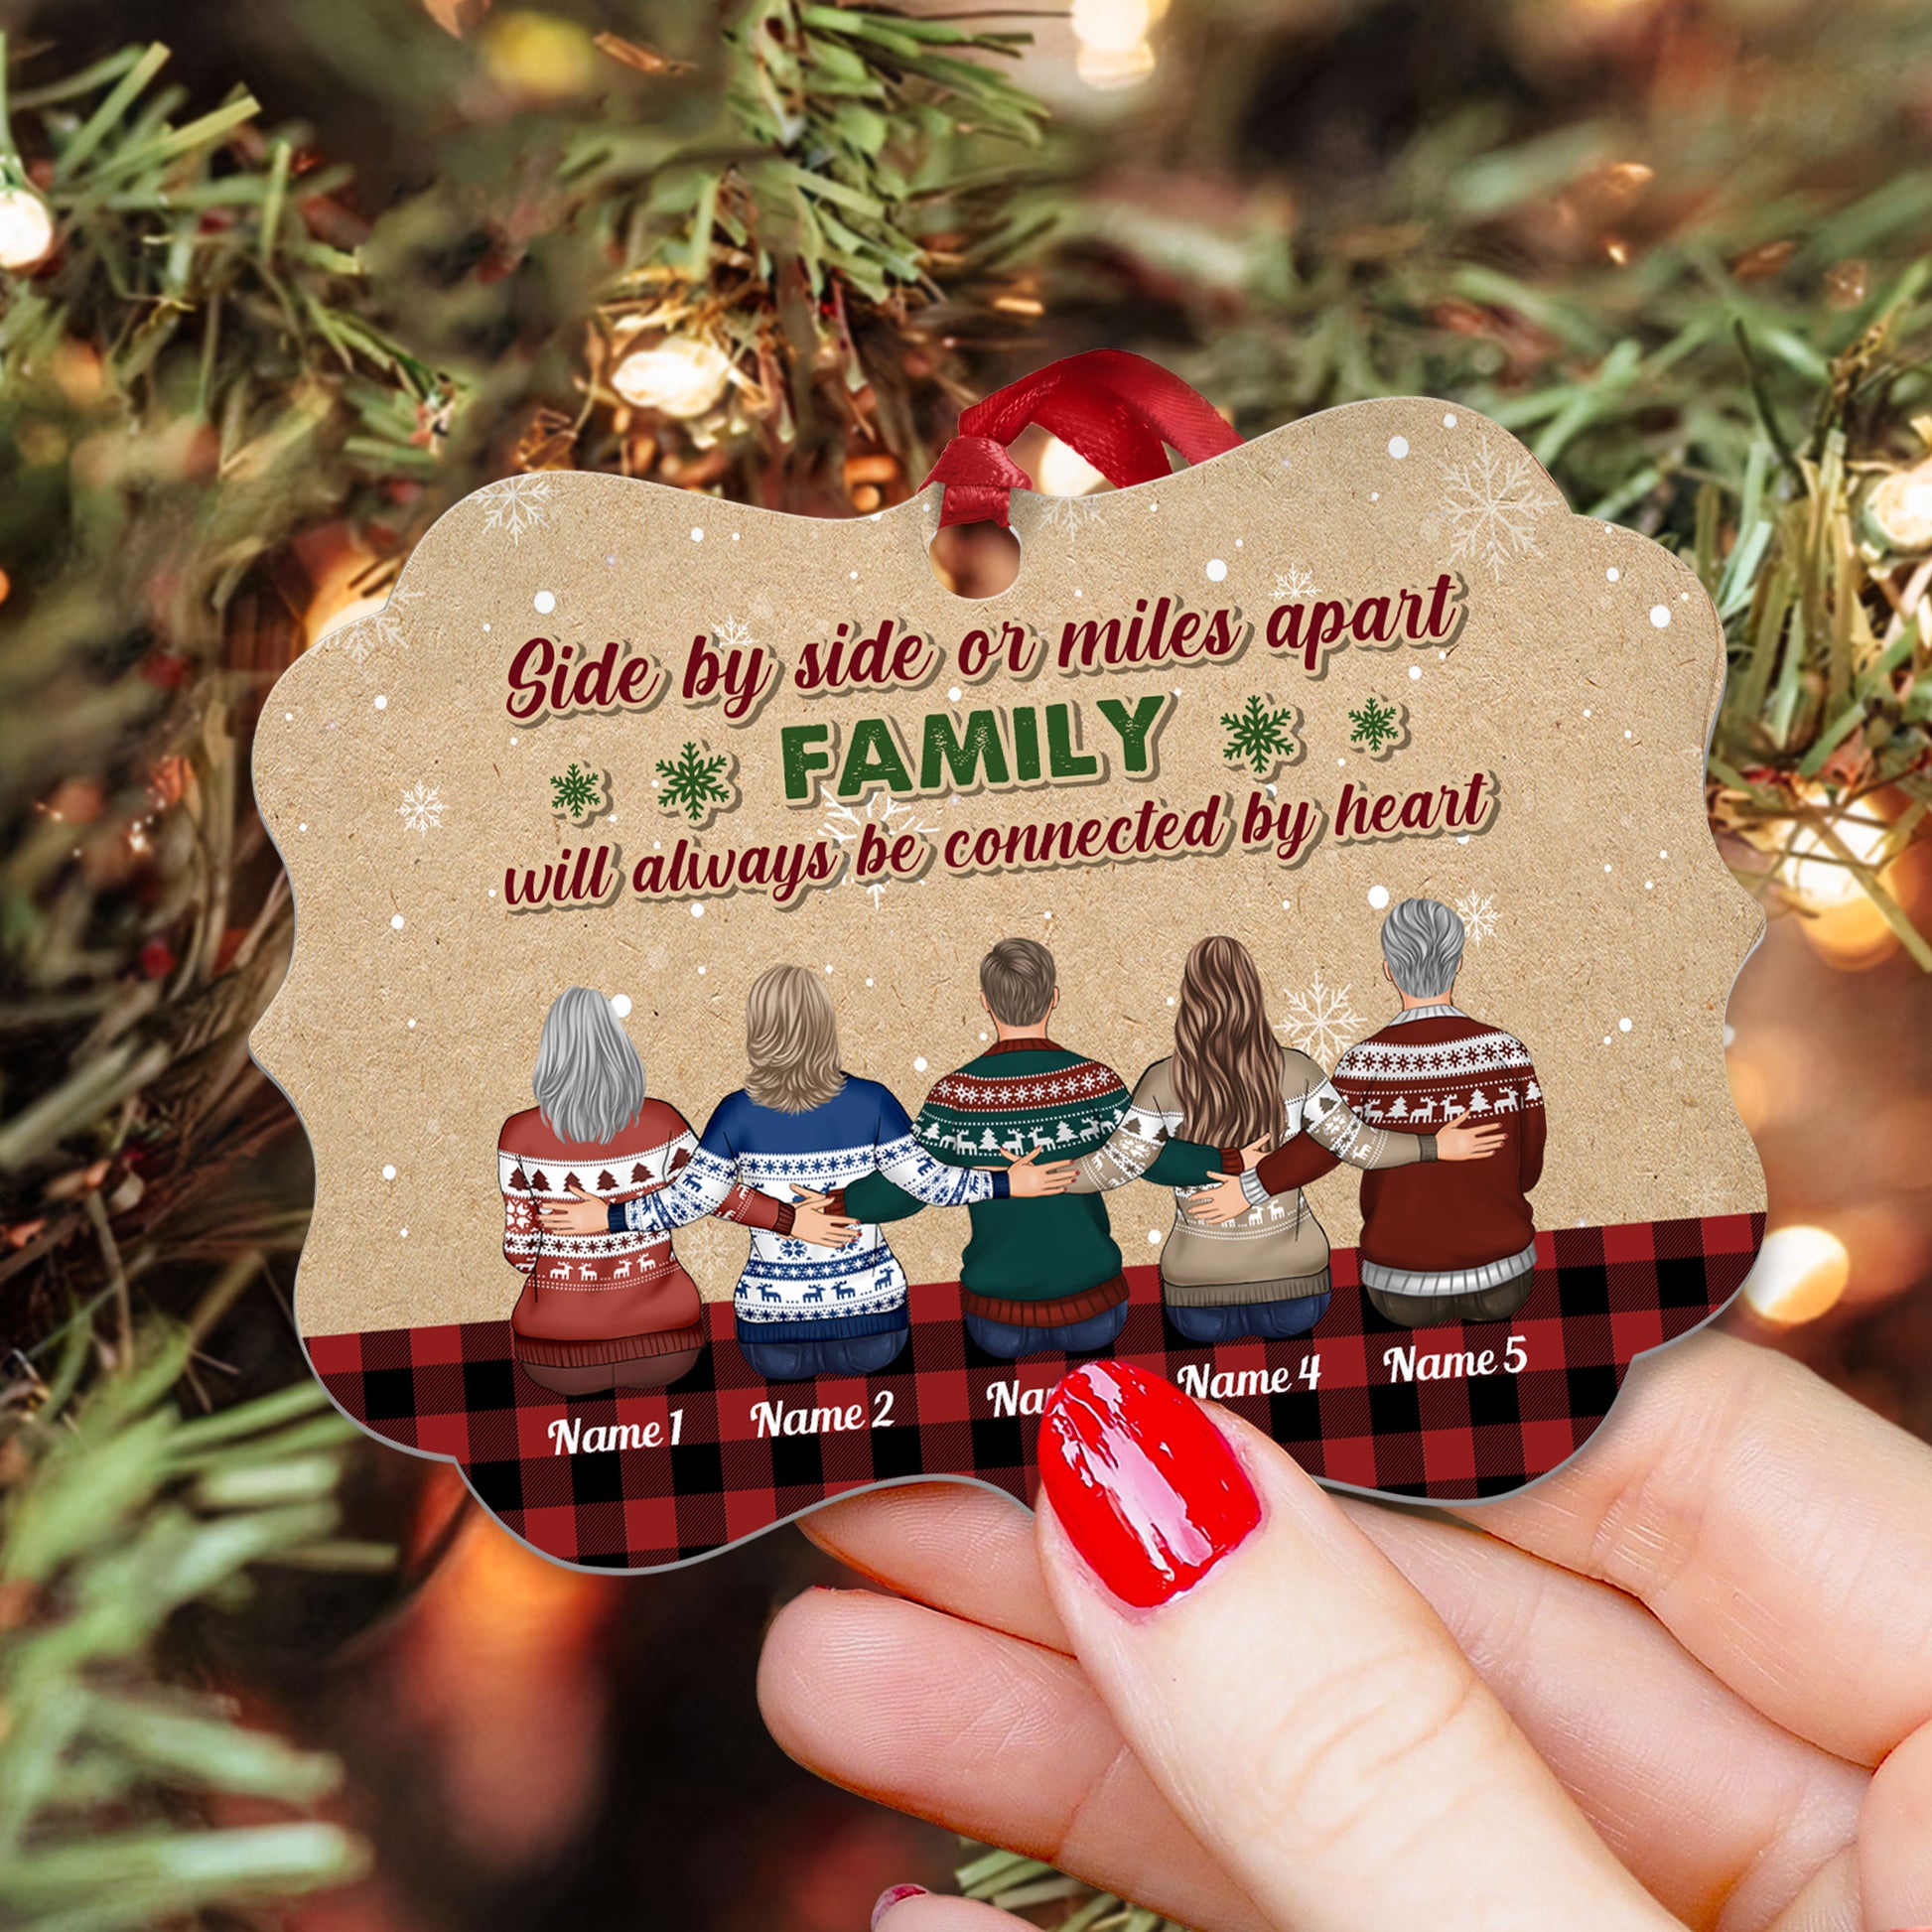 Family Will Always Be Connected By Heart - Personalized Aluminum Ornament - Christmas Gift For Family Members